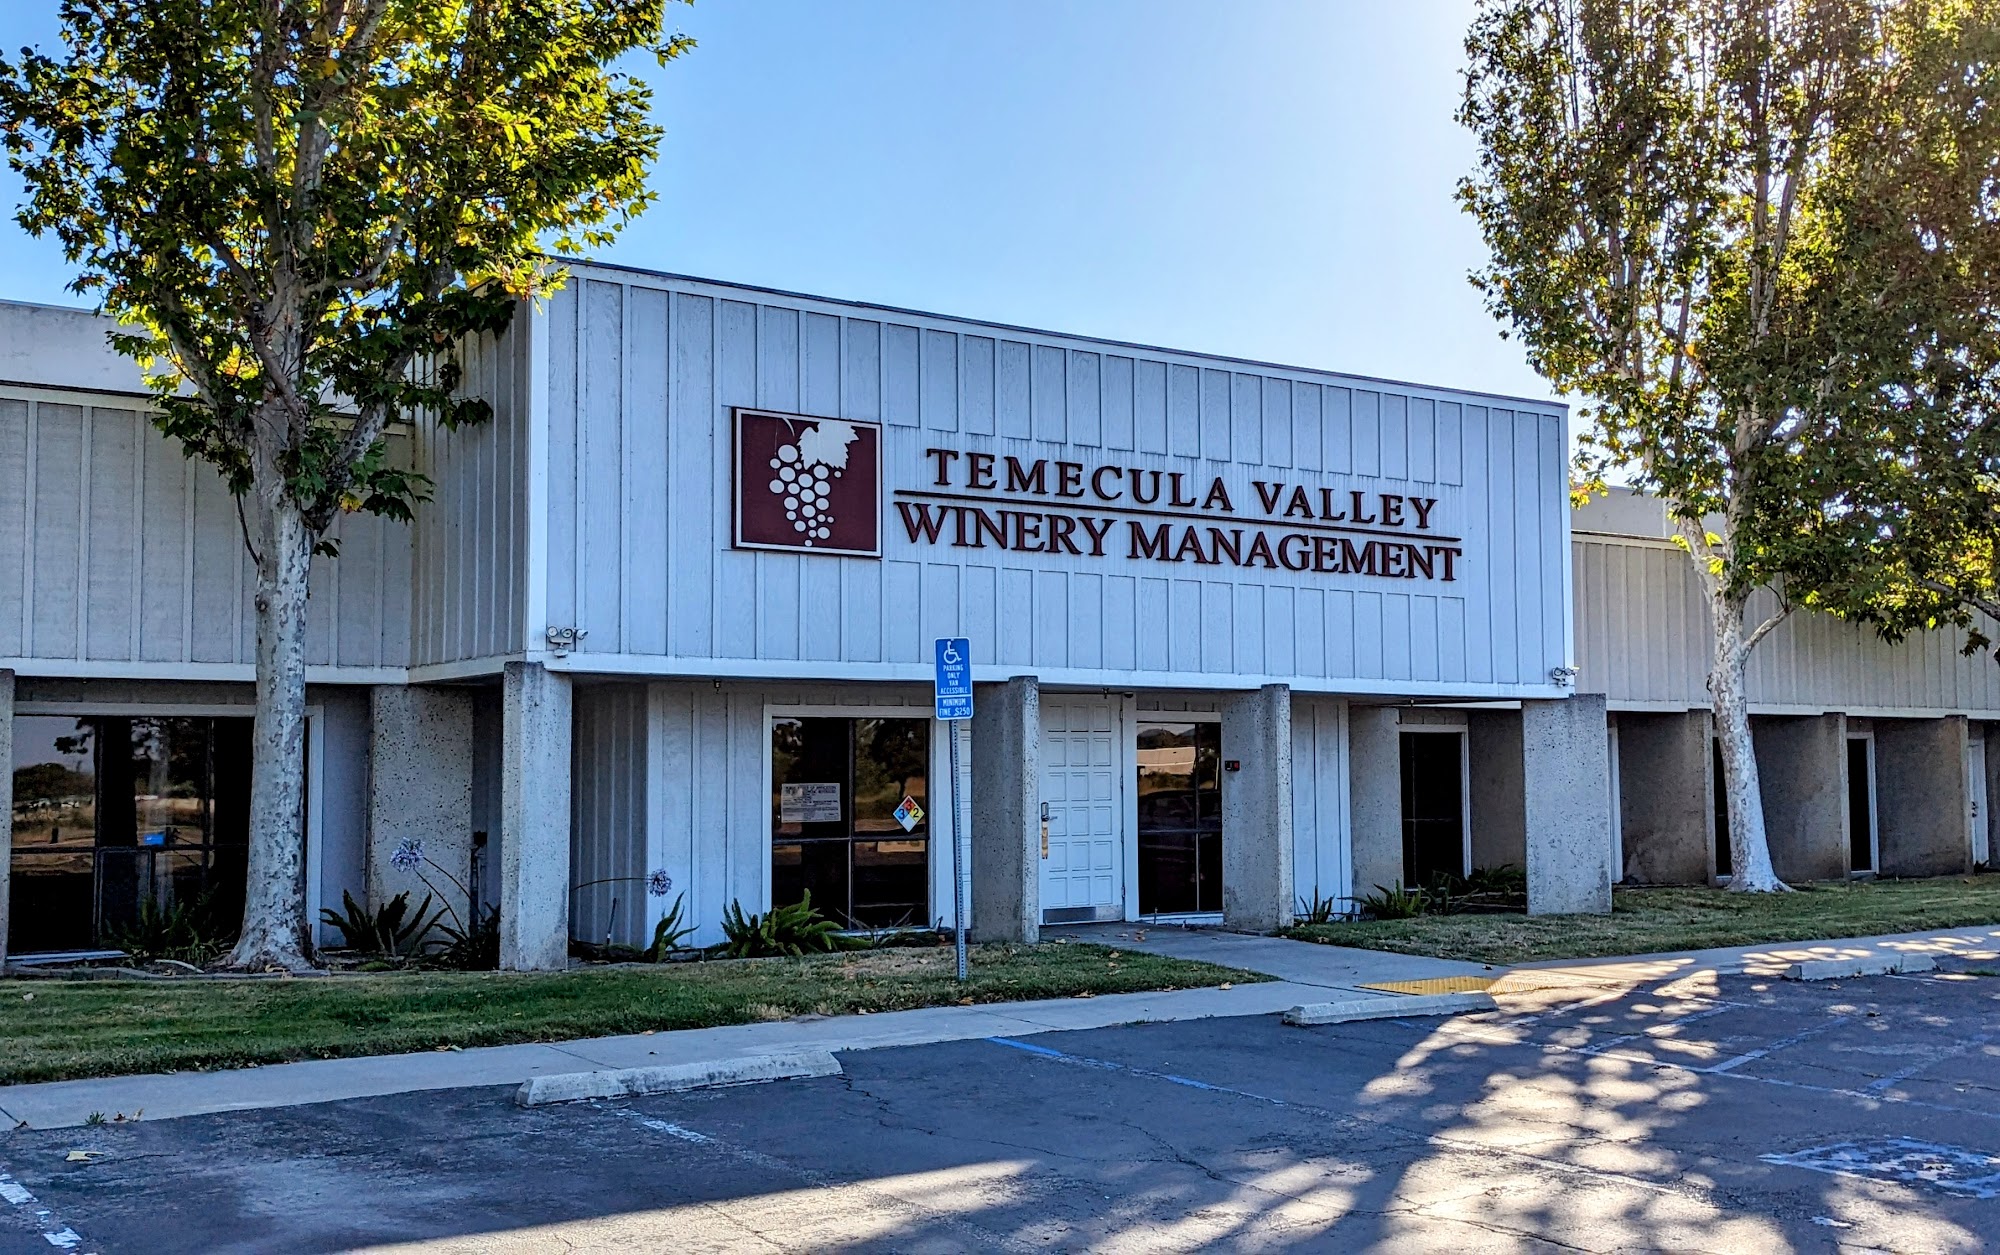 Temecula Valley Winery Management